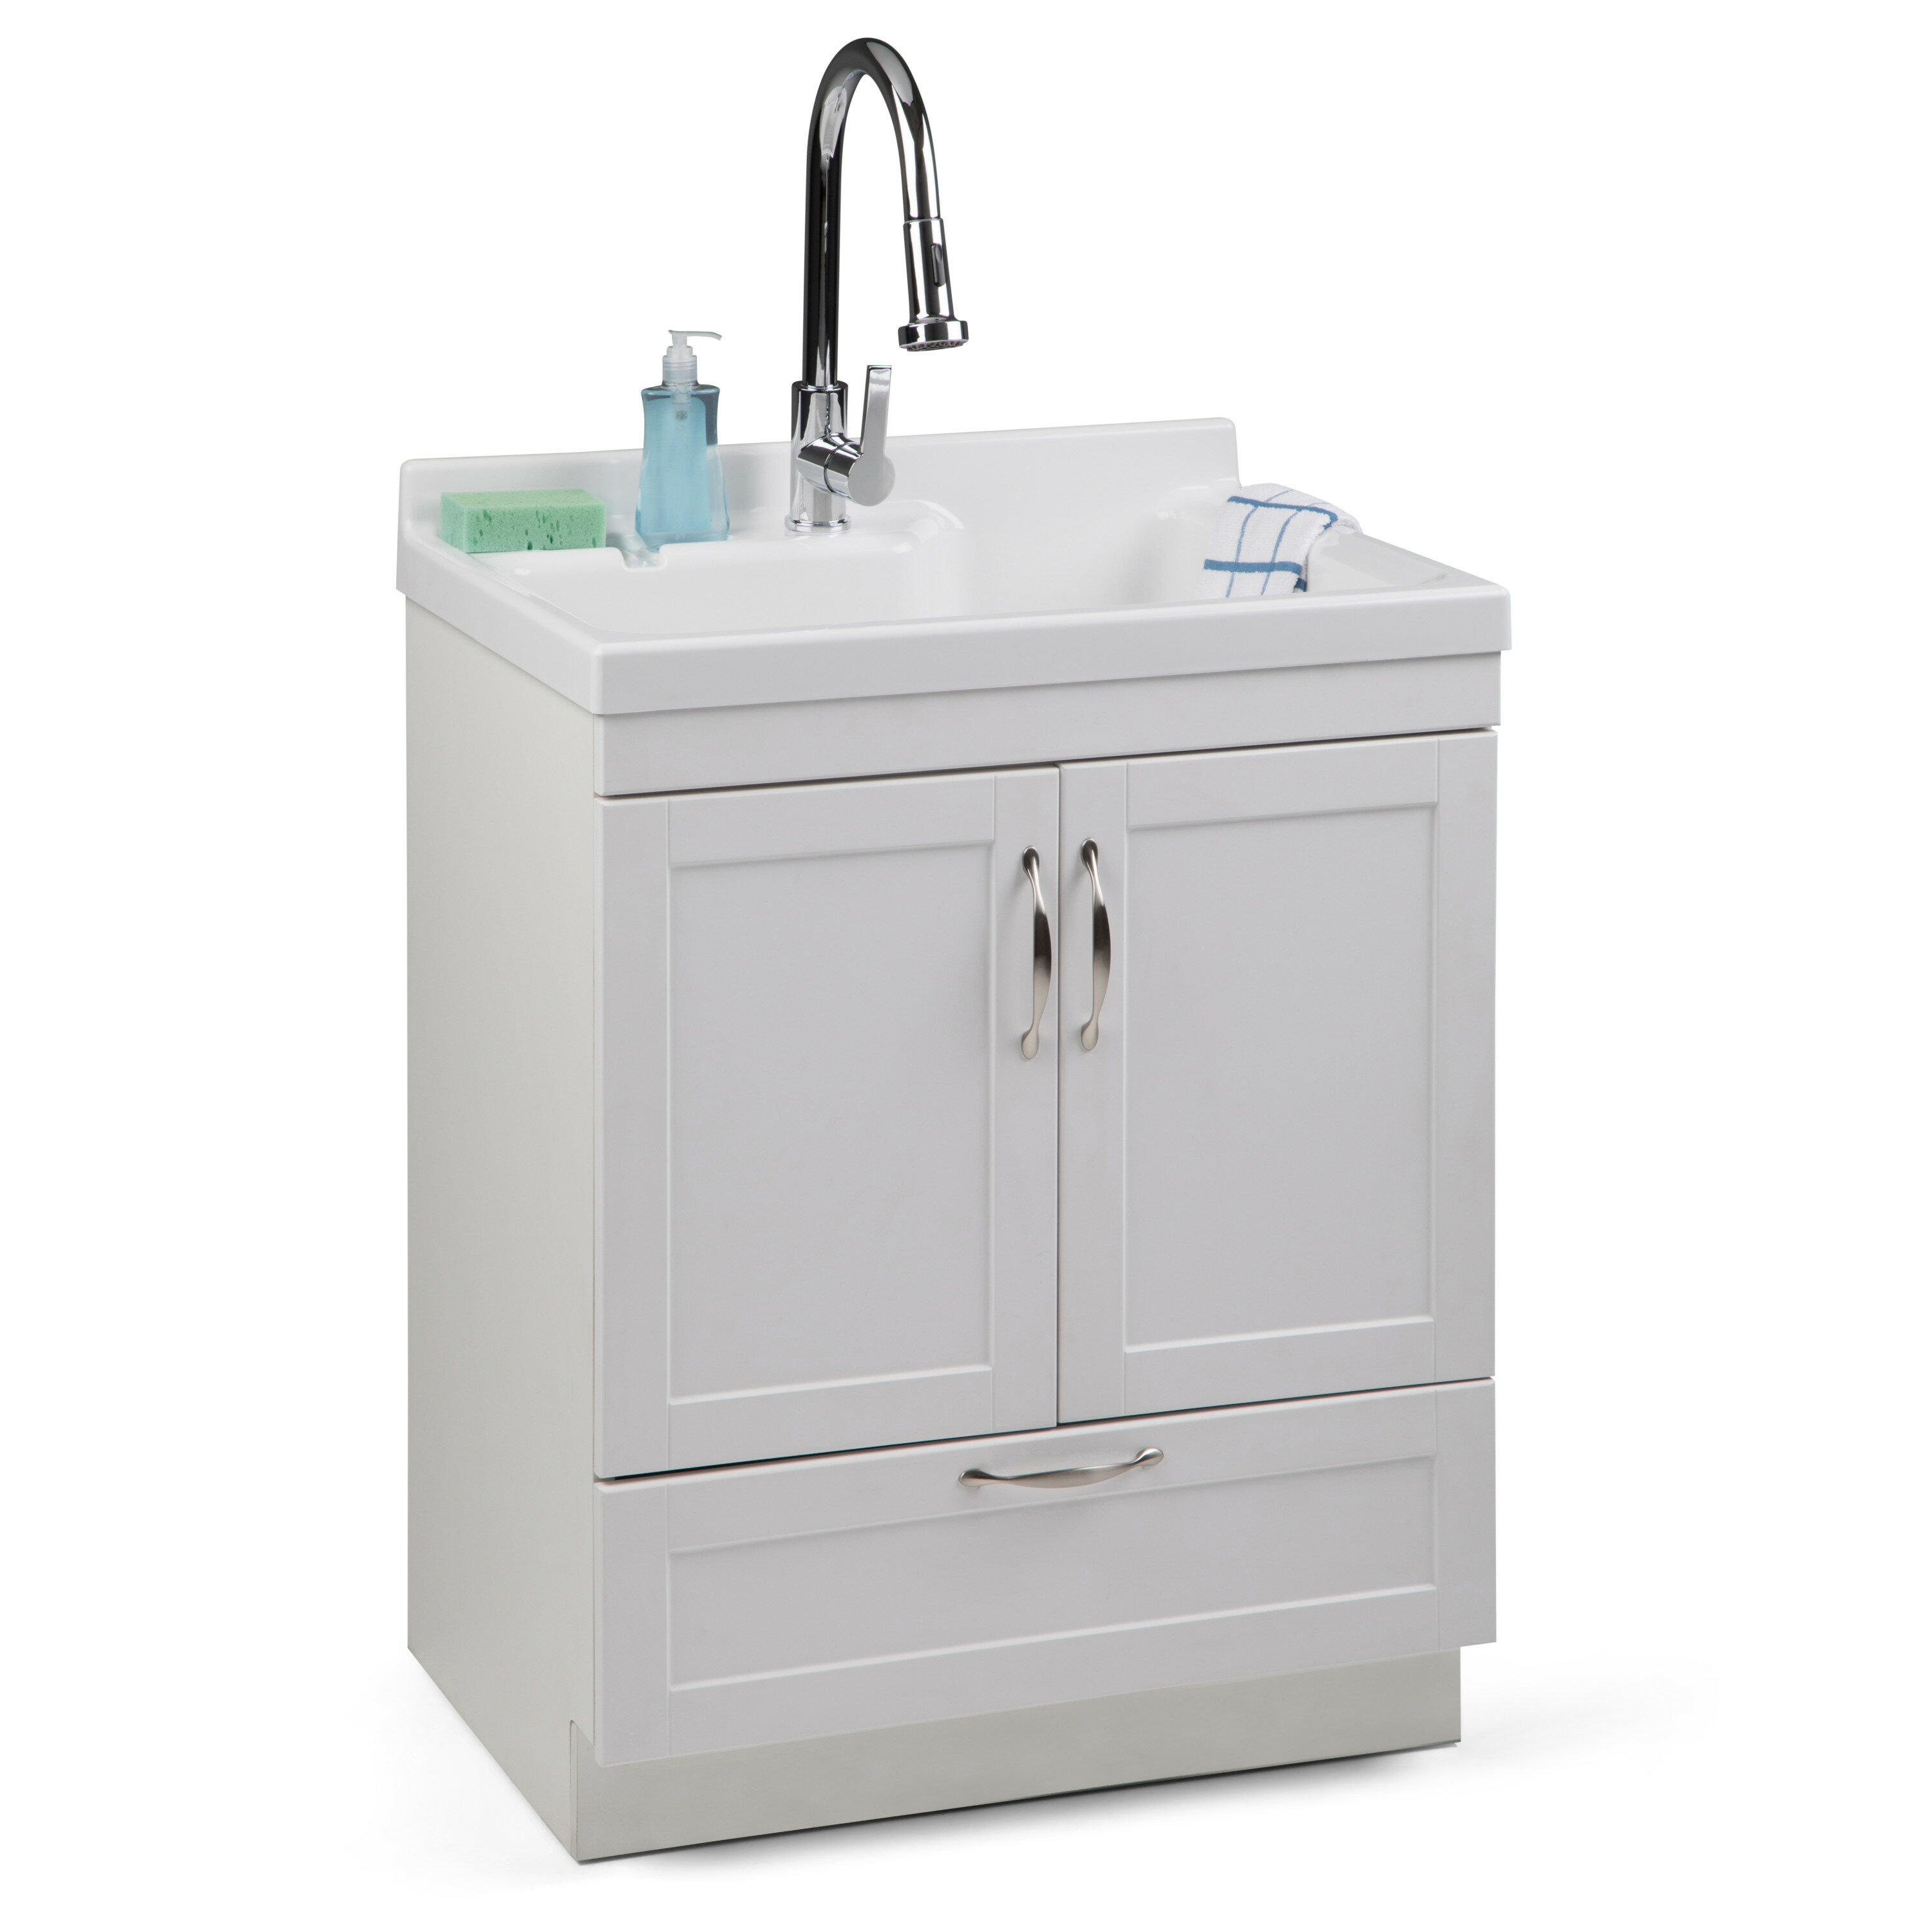  Kitchen Sink and Cabinet Combo,Utility Laundry Sink with  Stainless Steel Basin,Bathroom Vanity Aluminum Base Cabinet,Single  Freestanding Garage Sink with Storage,for Restaurant,Laundry Room,Outdoor (  : כלי עבודה ושיפוץ ביתי